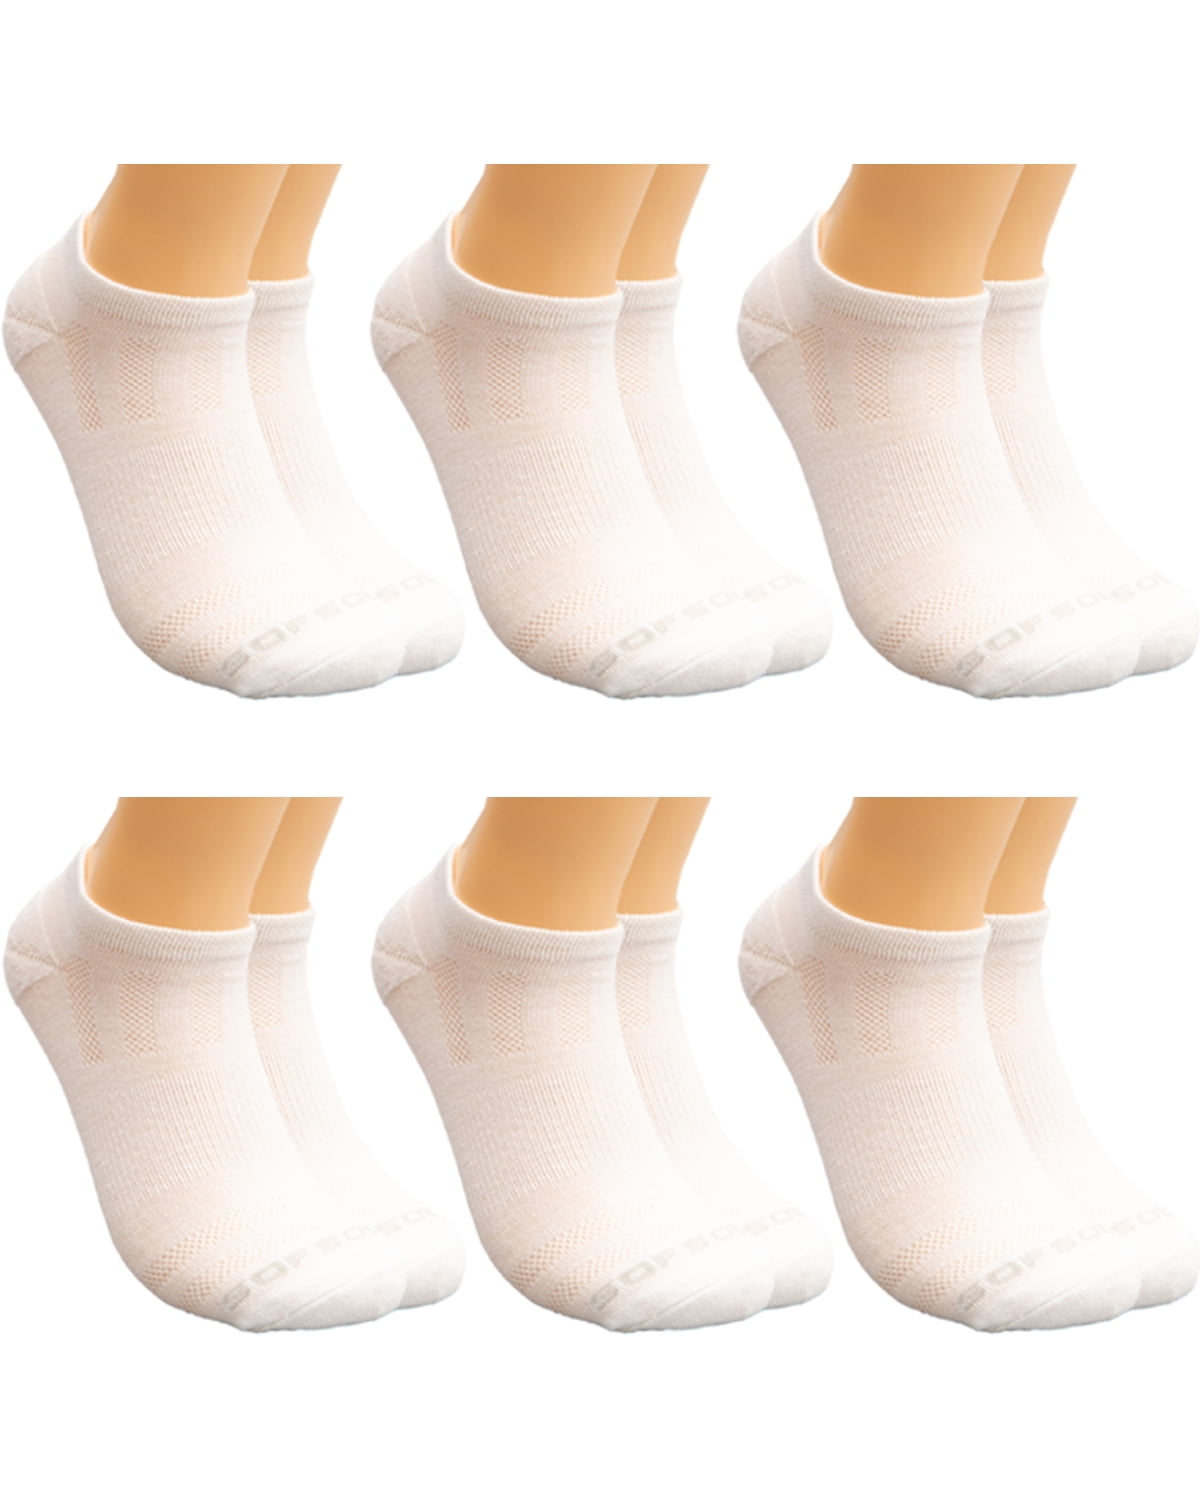 6 Pairs Sports Trainer Liners Ankle Low Rise Gym White Cushioned Socks Mens 3 